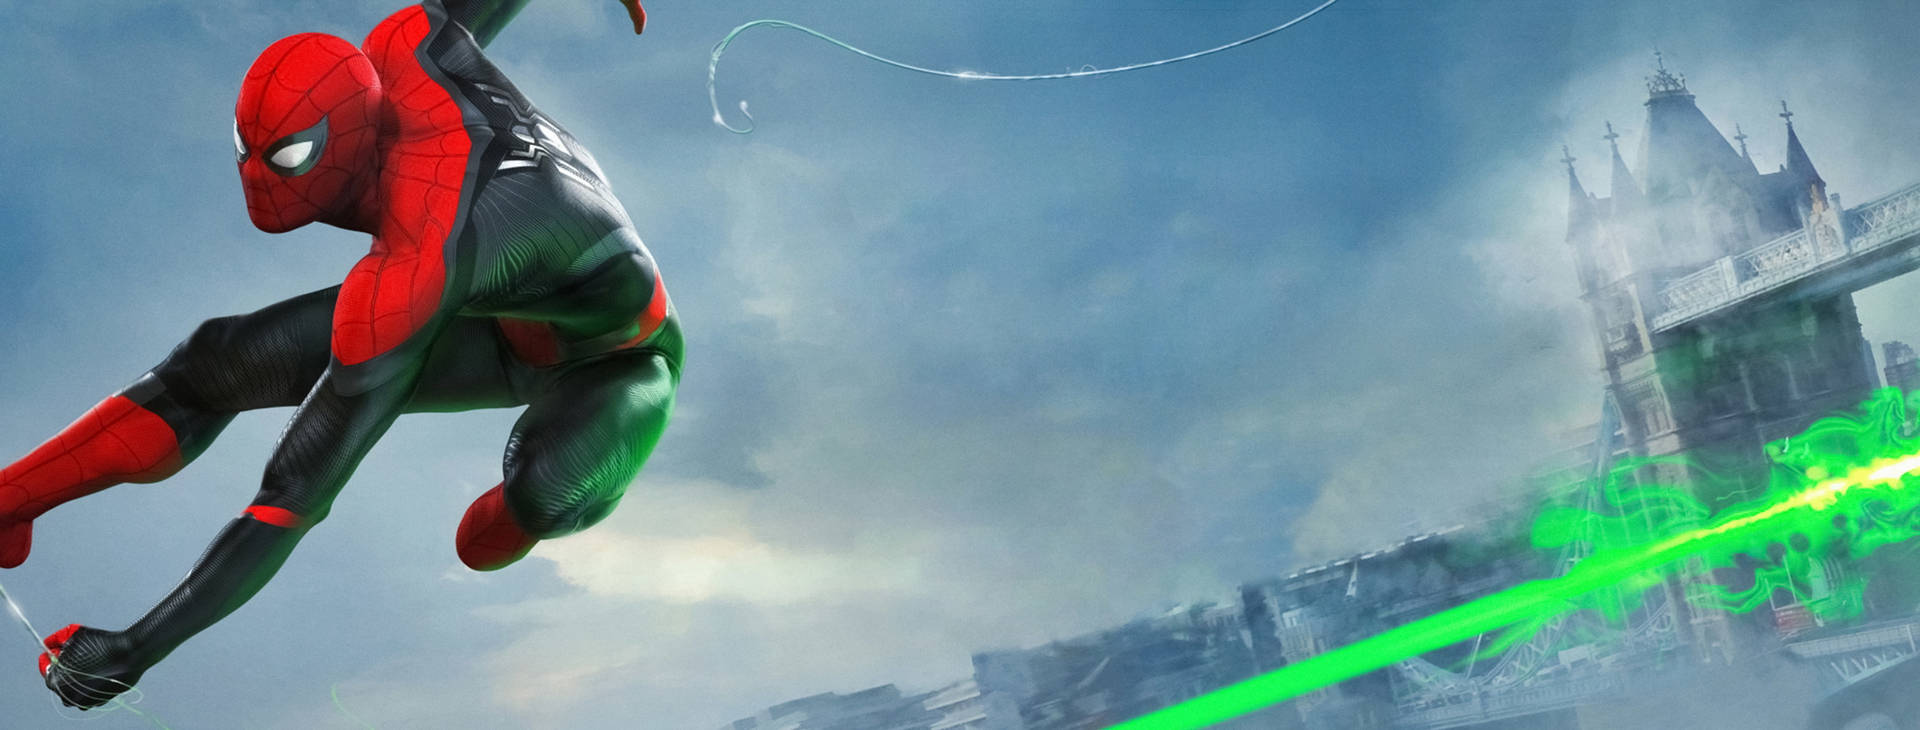 Green Rays Spider Man Far From Home 2019 Background